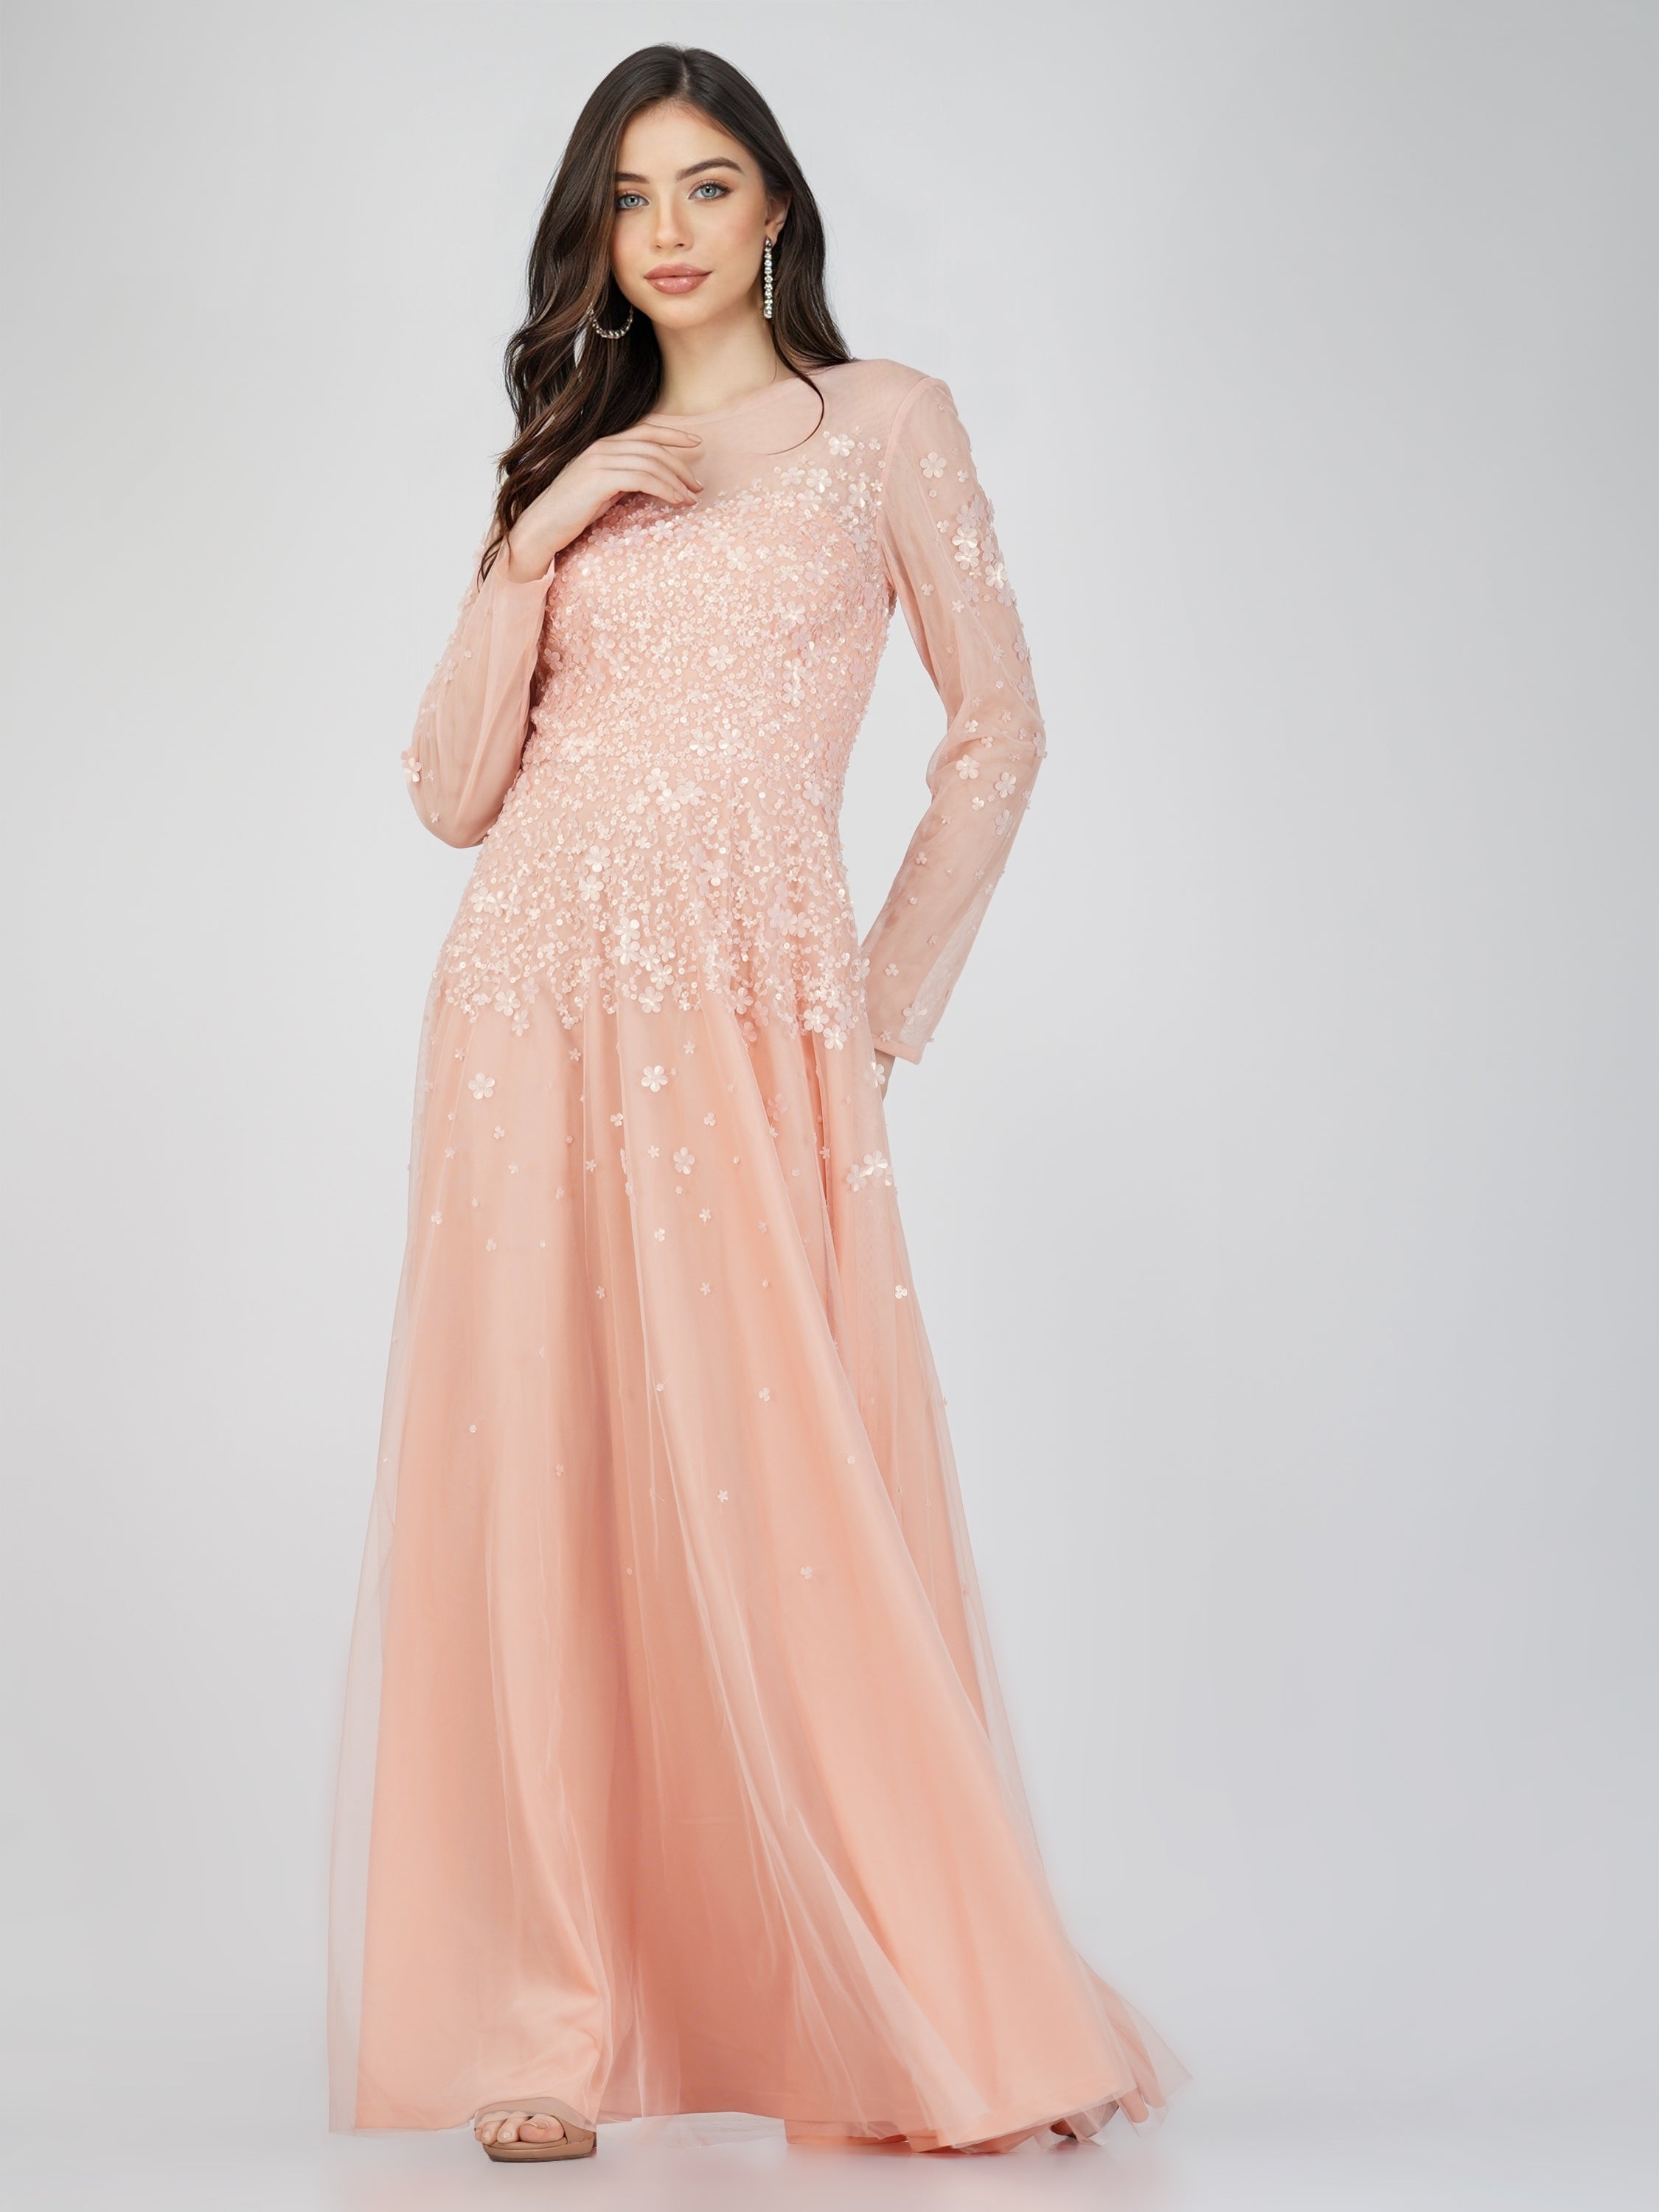 Luciene Long Sleeve Embellished Maxi Dress in Blush Pink – Lace & Beads